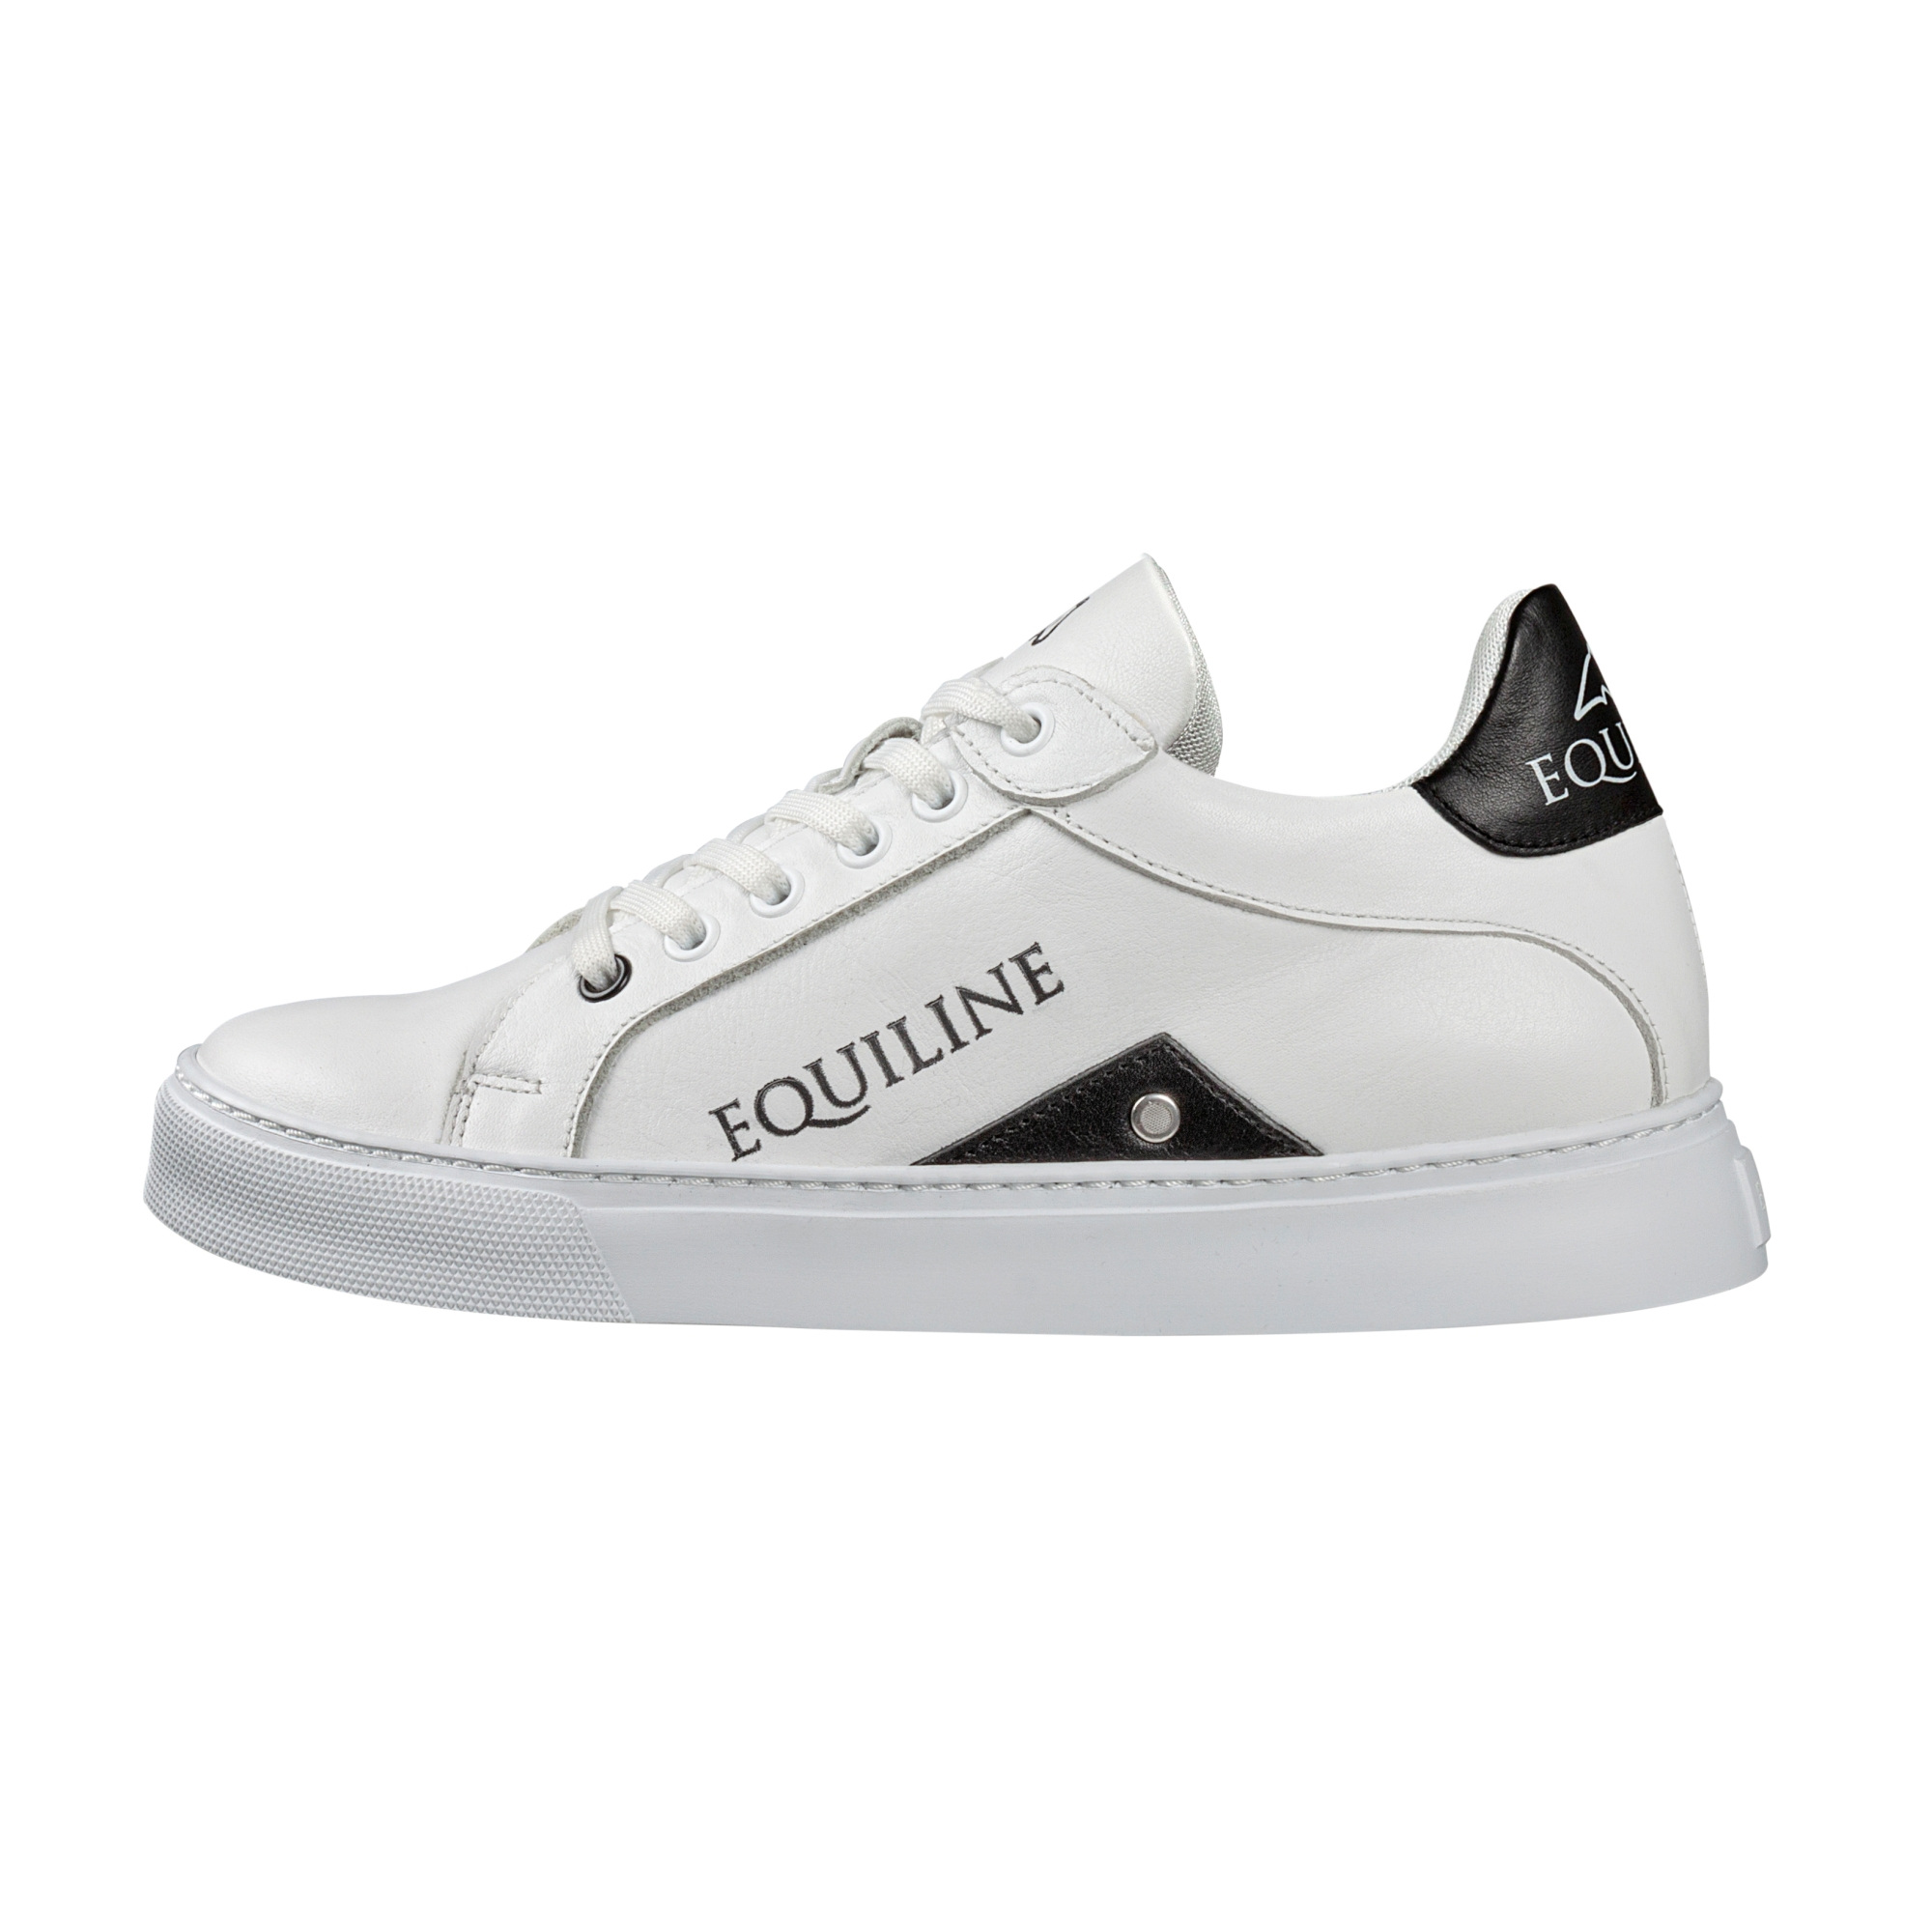 EQUILINE RUDYK RIDING LEATHER SNEAKERS - EQUISHOP Equestrian Shop